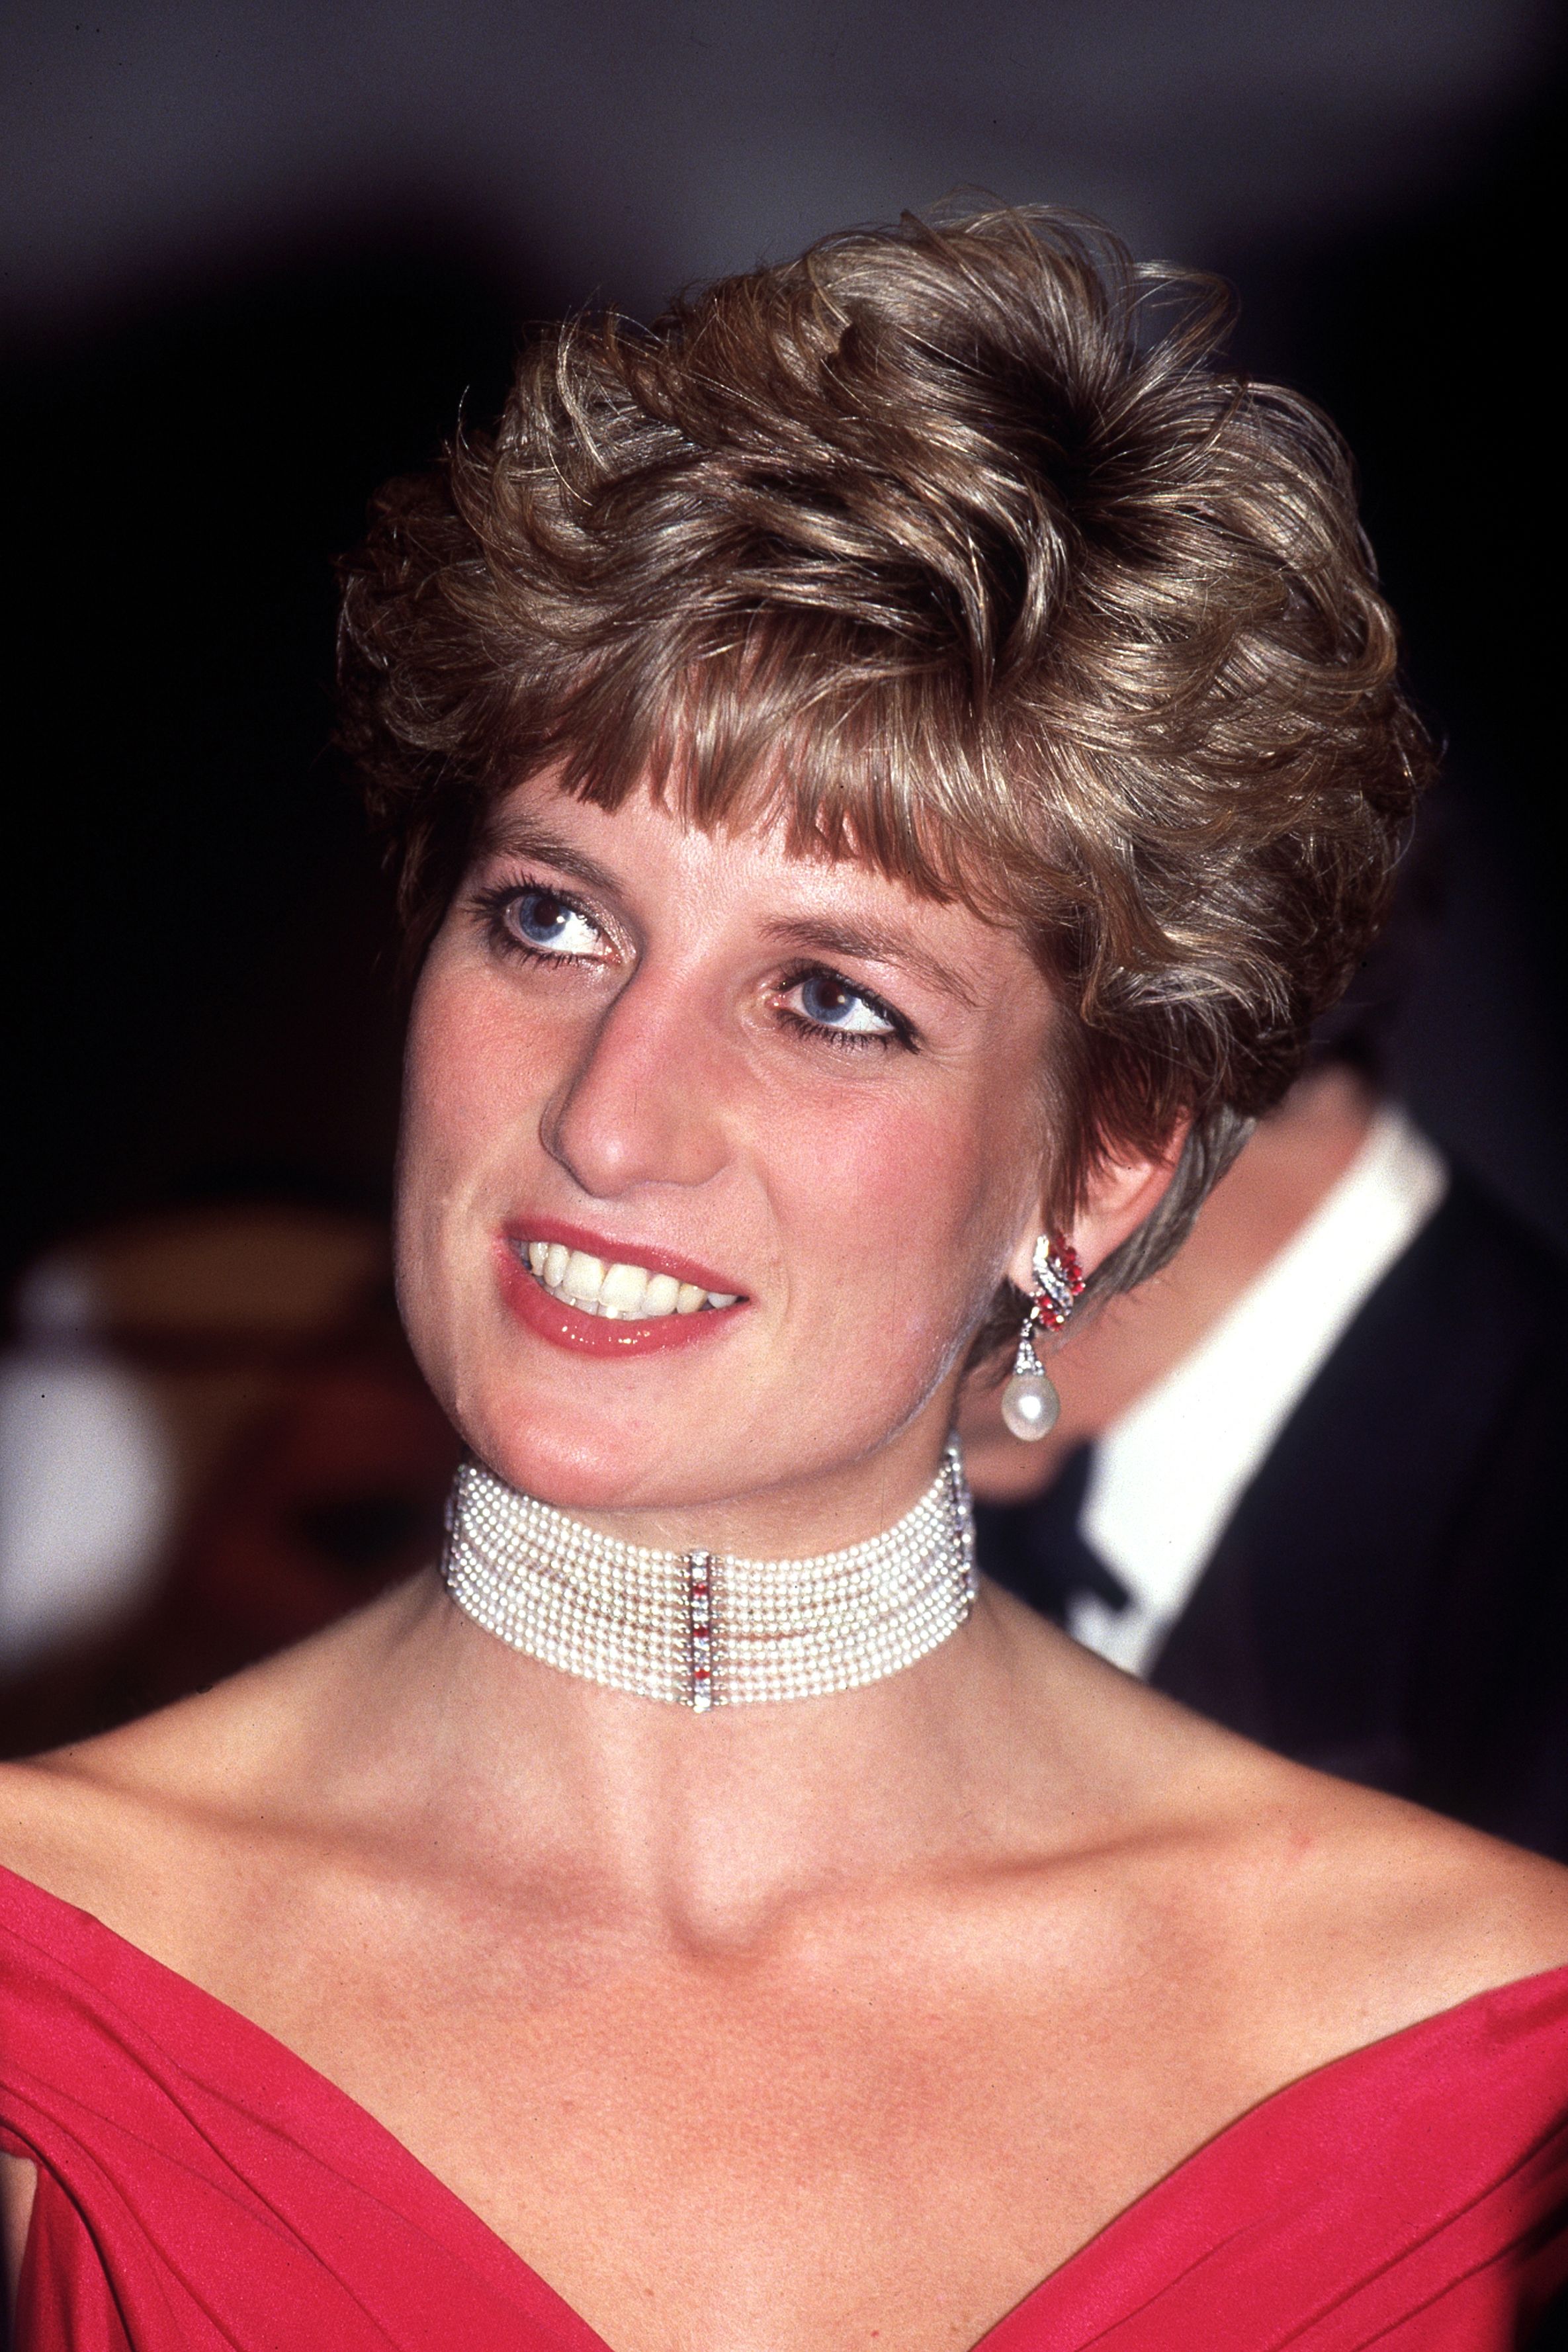 Princess Diana's Bombshell 1995 Interview Was Obtained by 'Deceit,'  Investigation Findings Show | wfaa.com